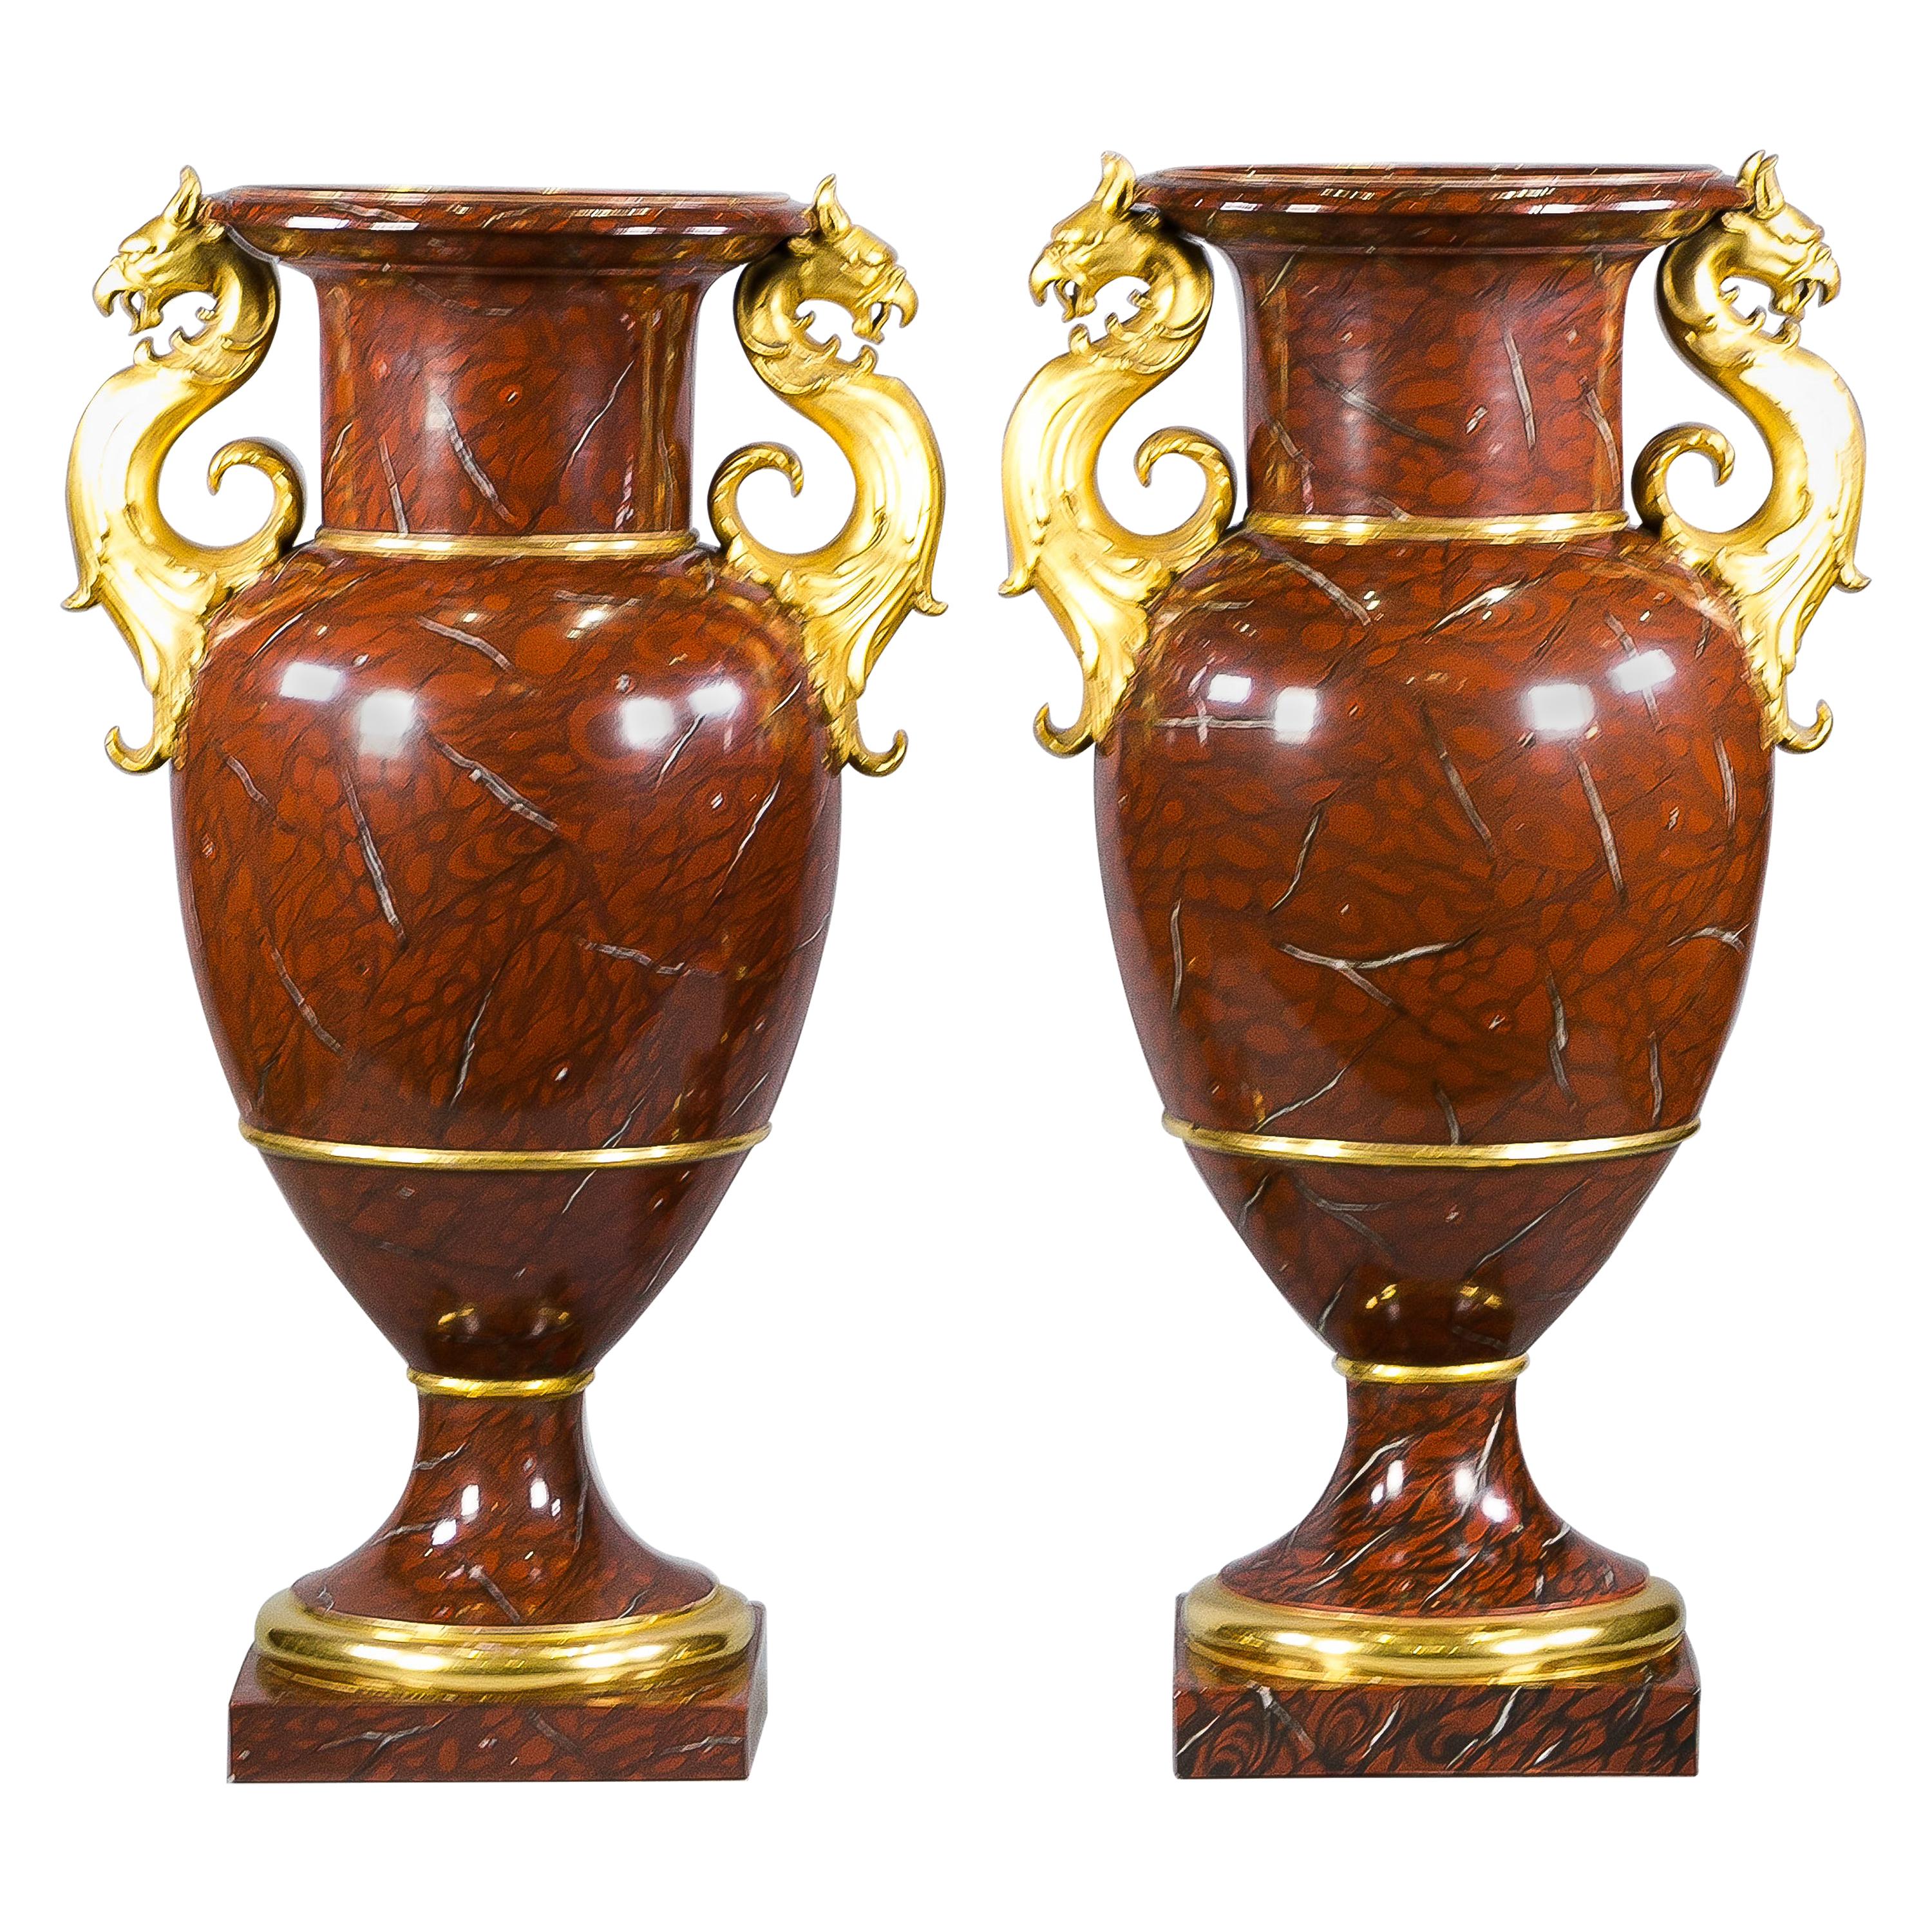 Pair of Berlin Porcelain Faux Marble and Gilt Urns, circa 1825 For Sale